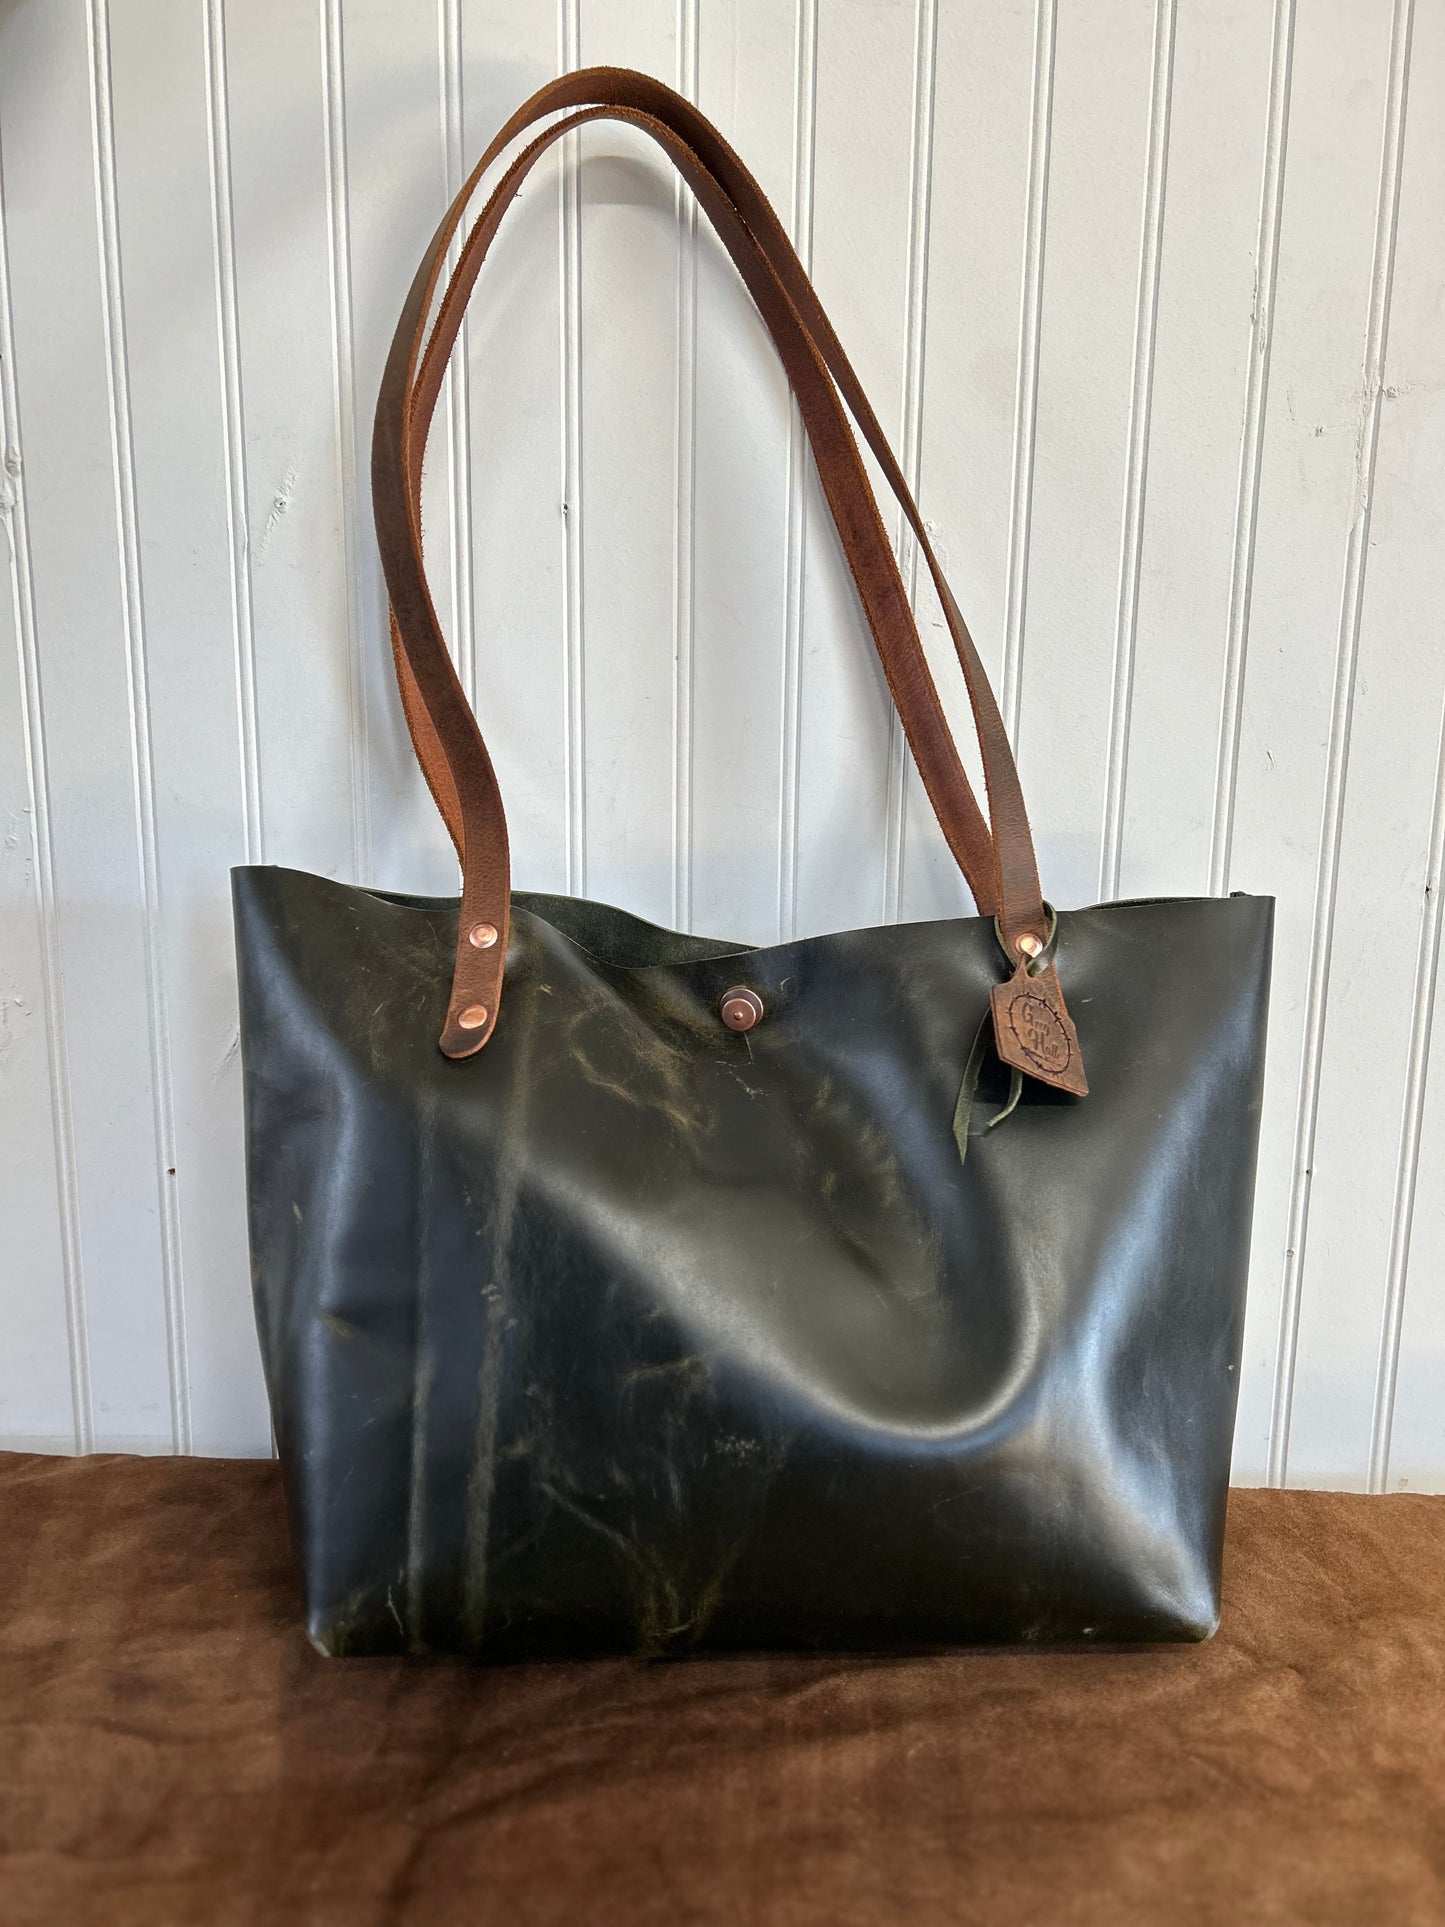 Distressed Green Oversized Tote